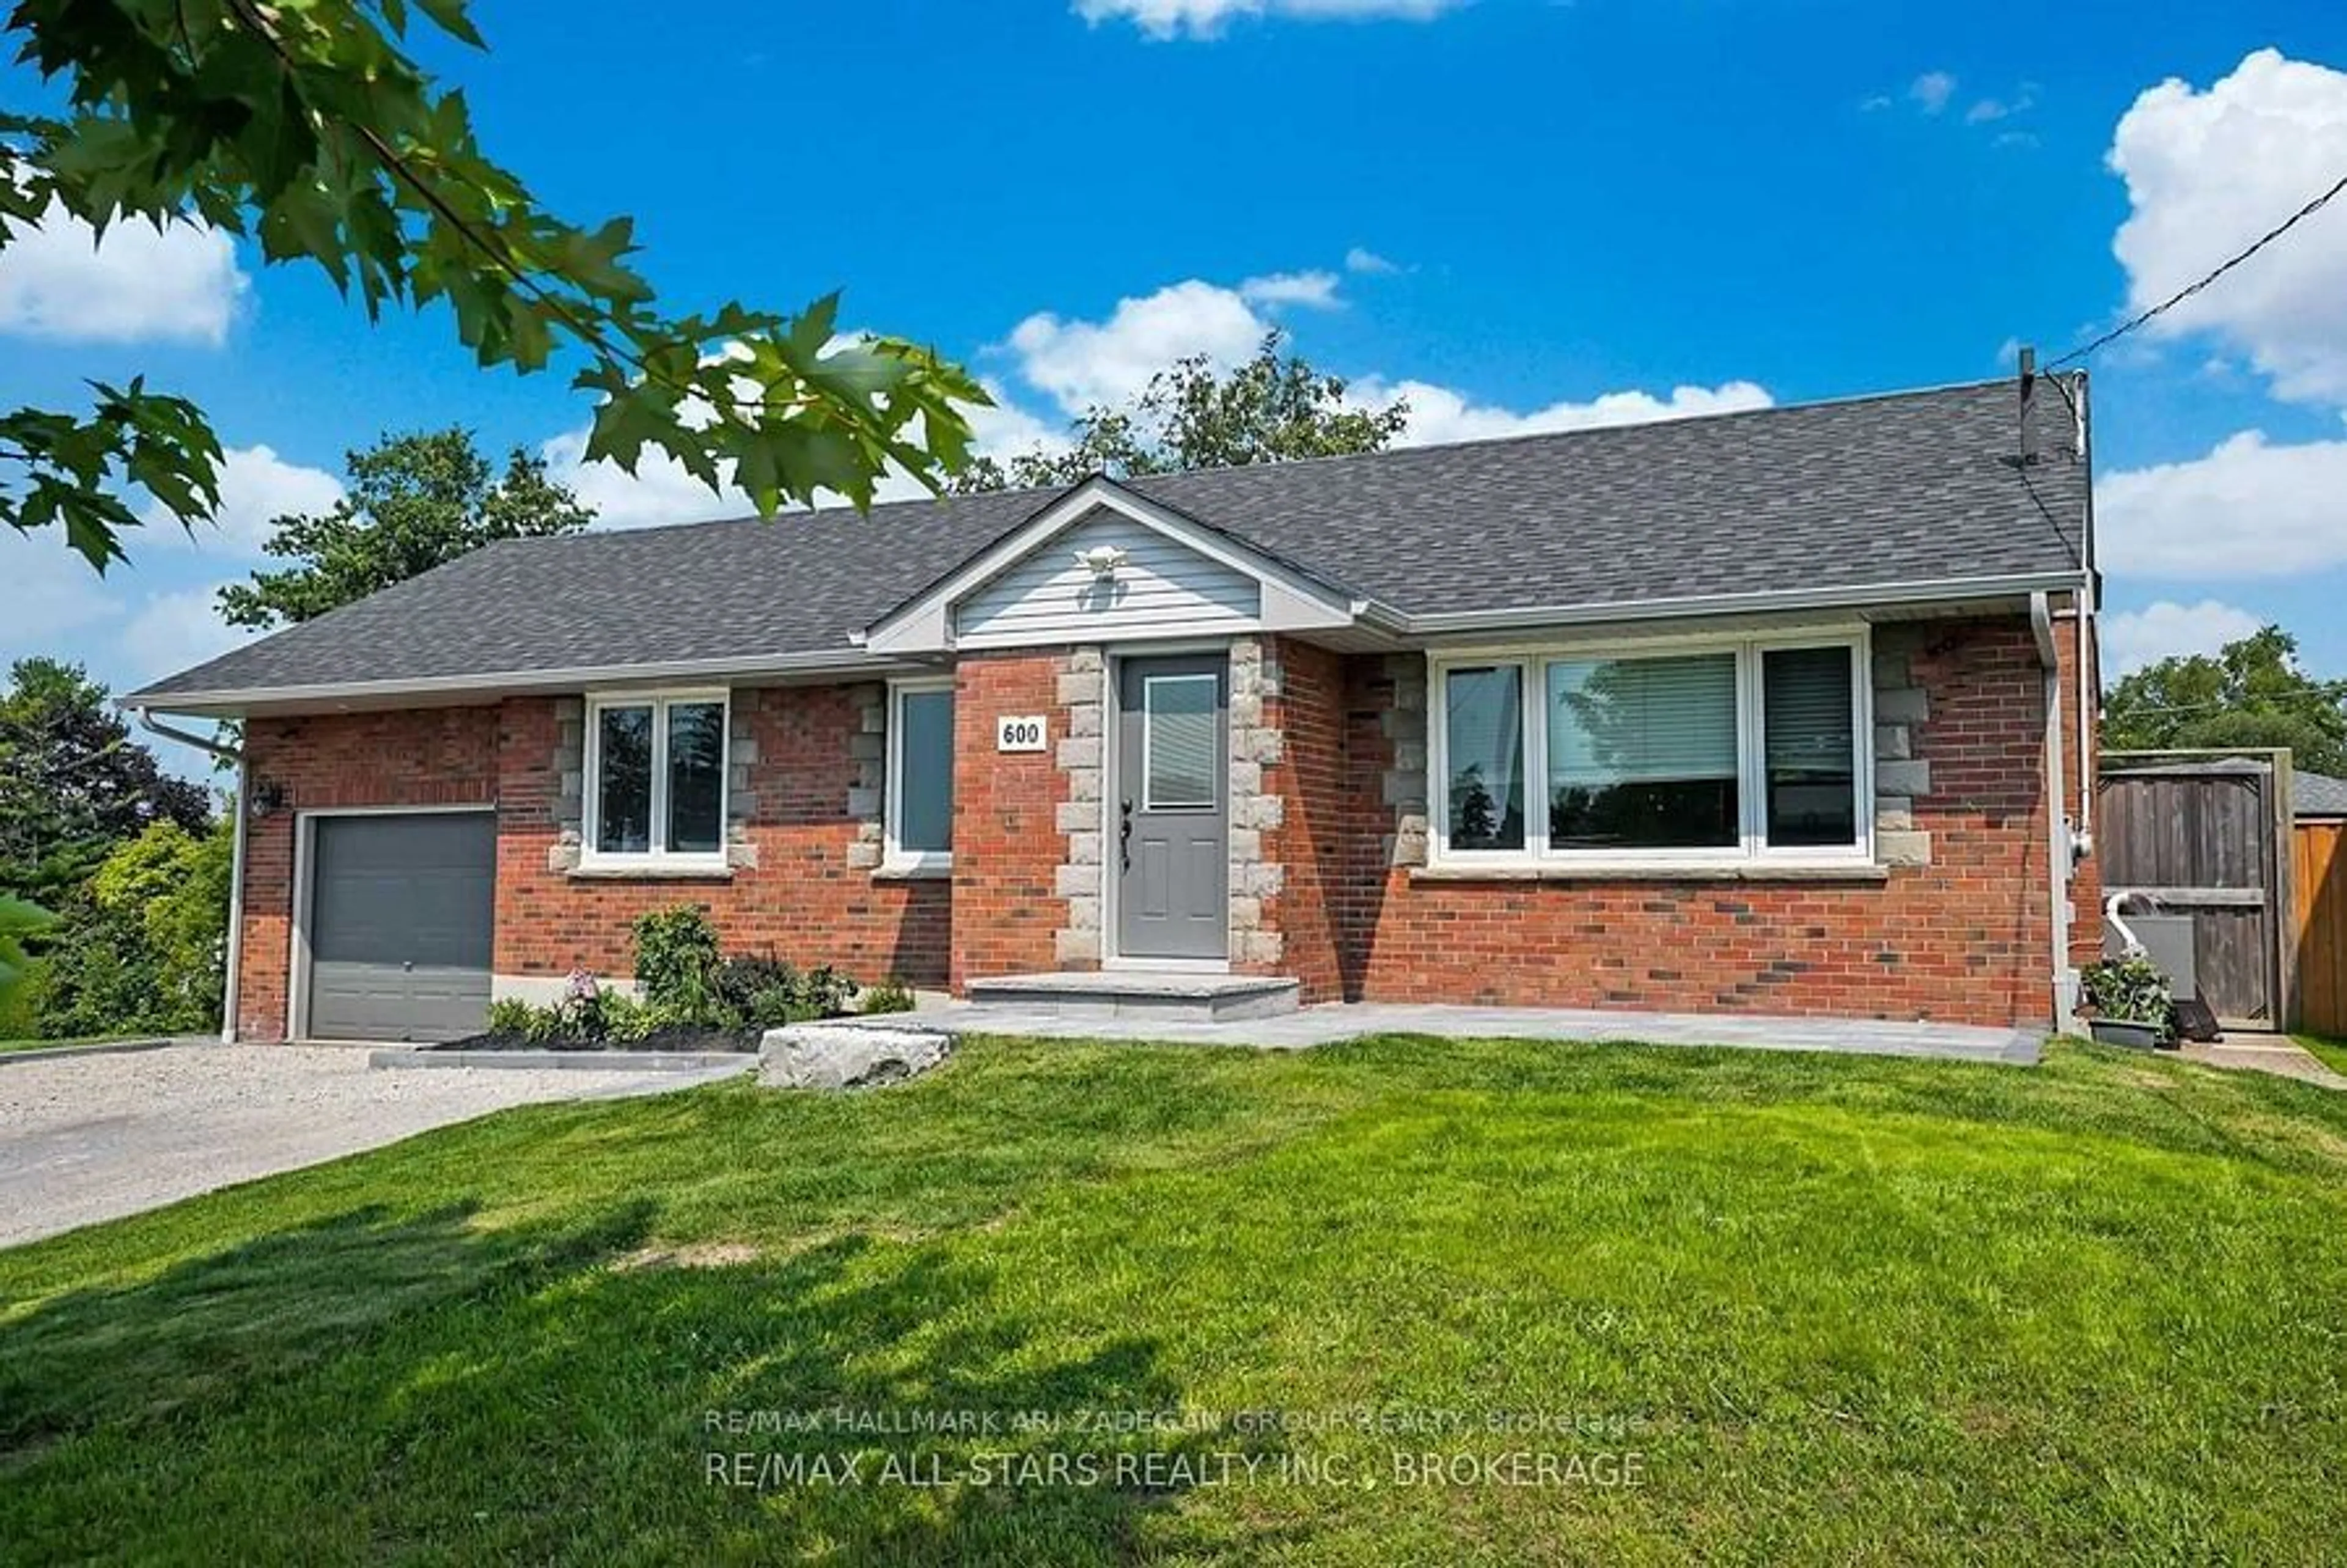 Home with brick exterior material for 600 Ridgeway Ave, Oshawa Ontario L1J 2W2